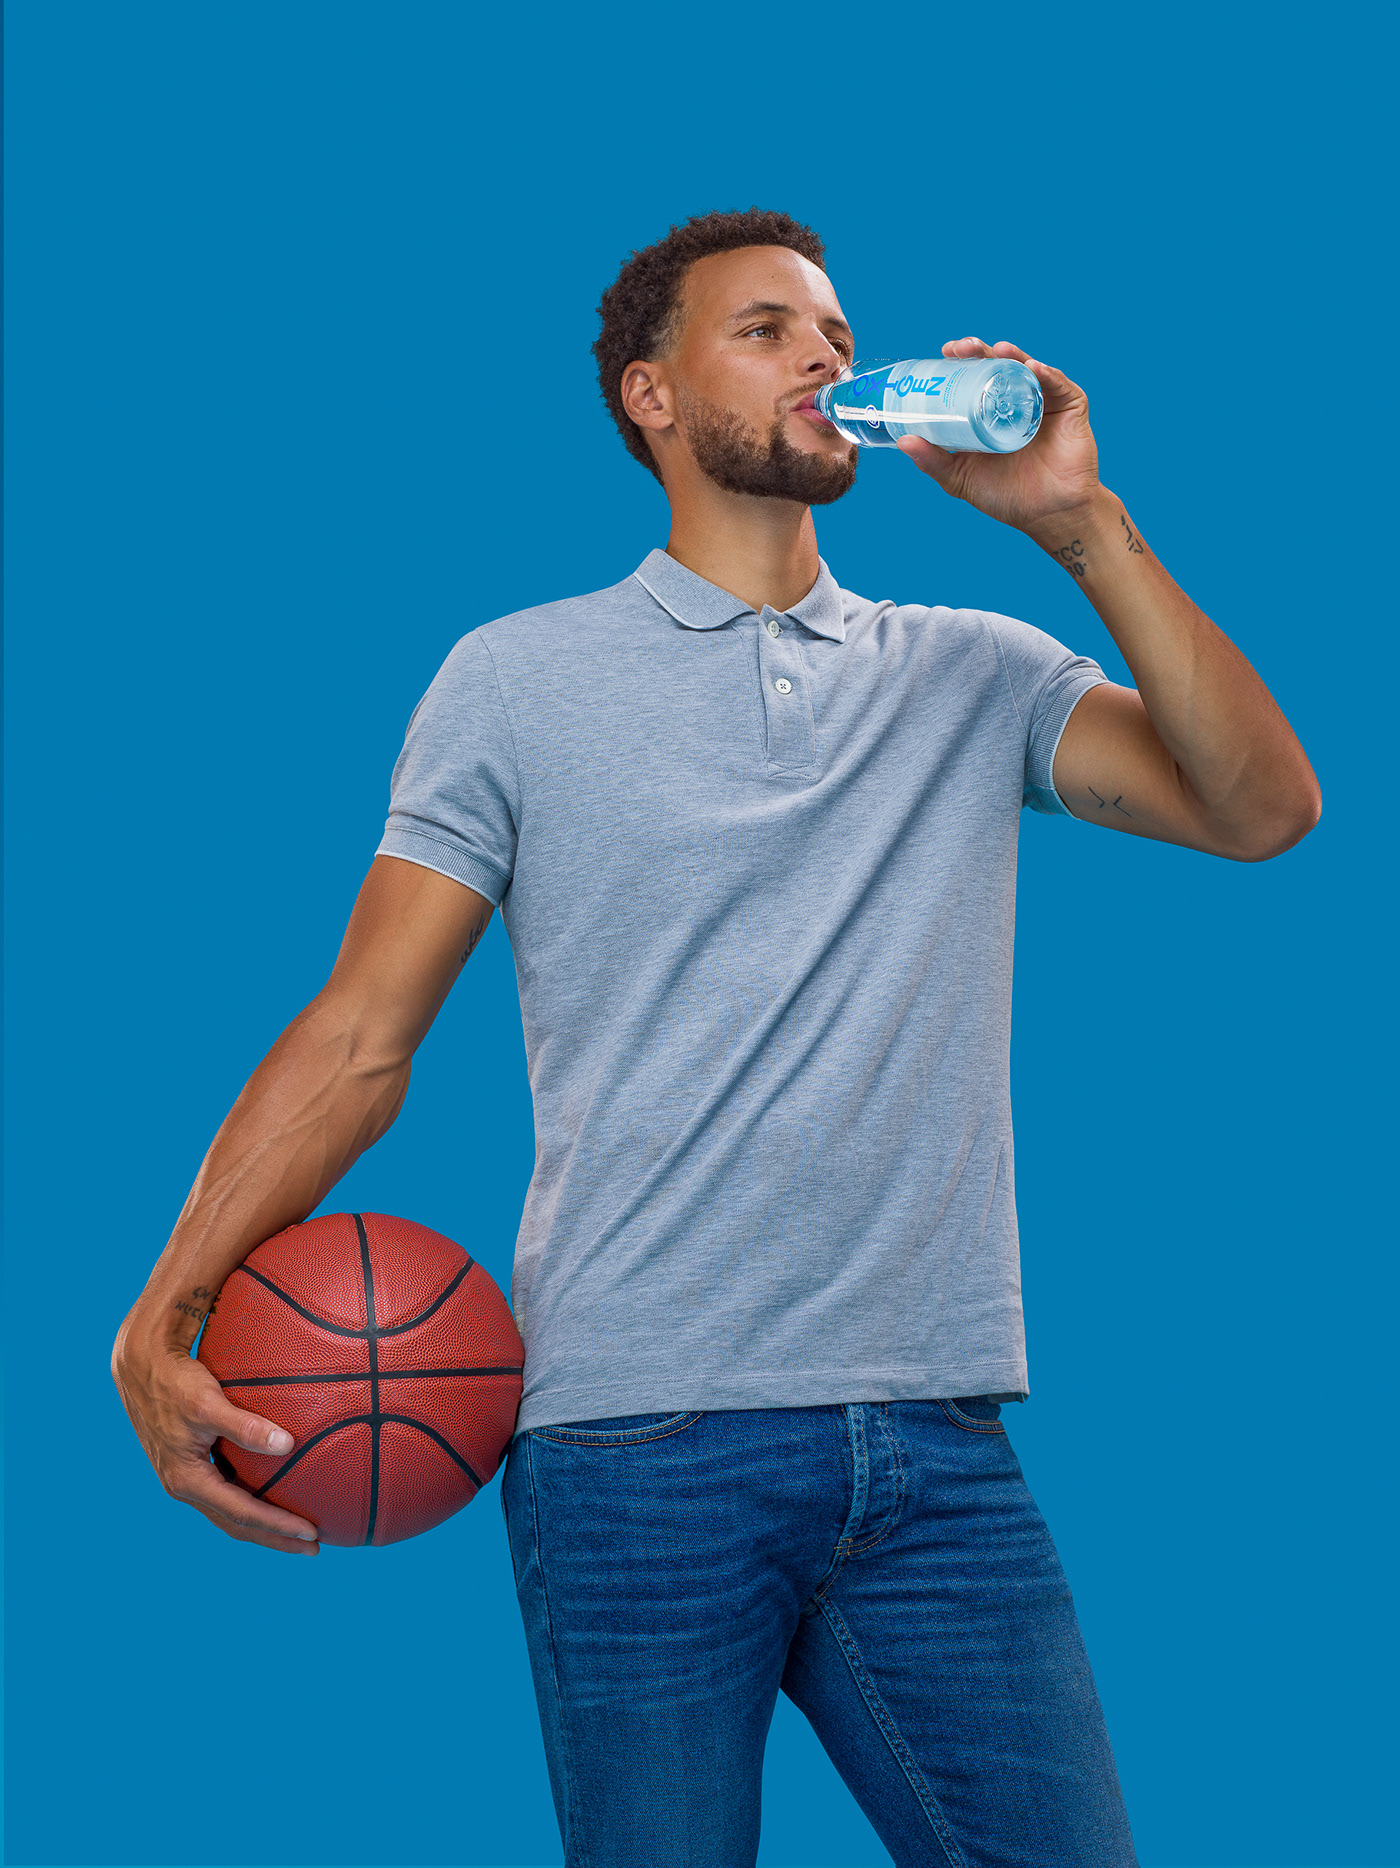 Advertising Photography Hasselblad NBA oxigen water profoto sports photography steph curry water photography